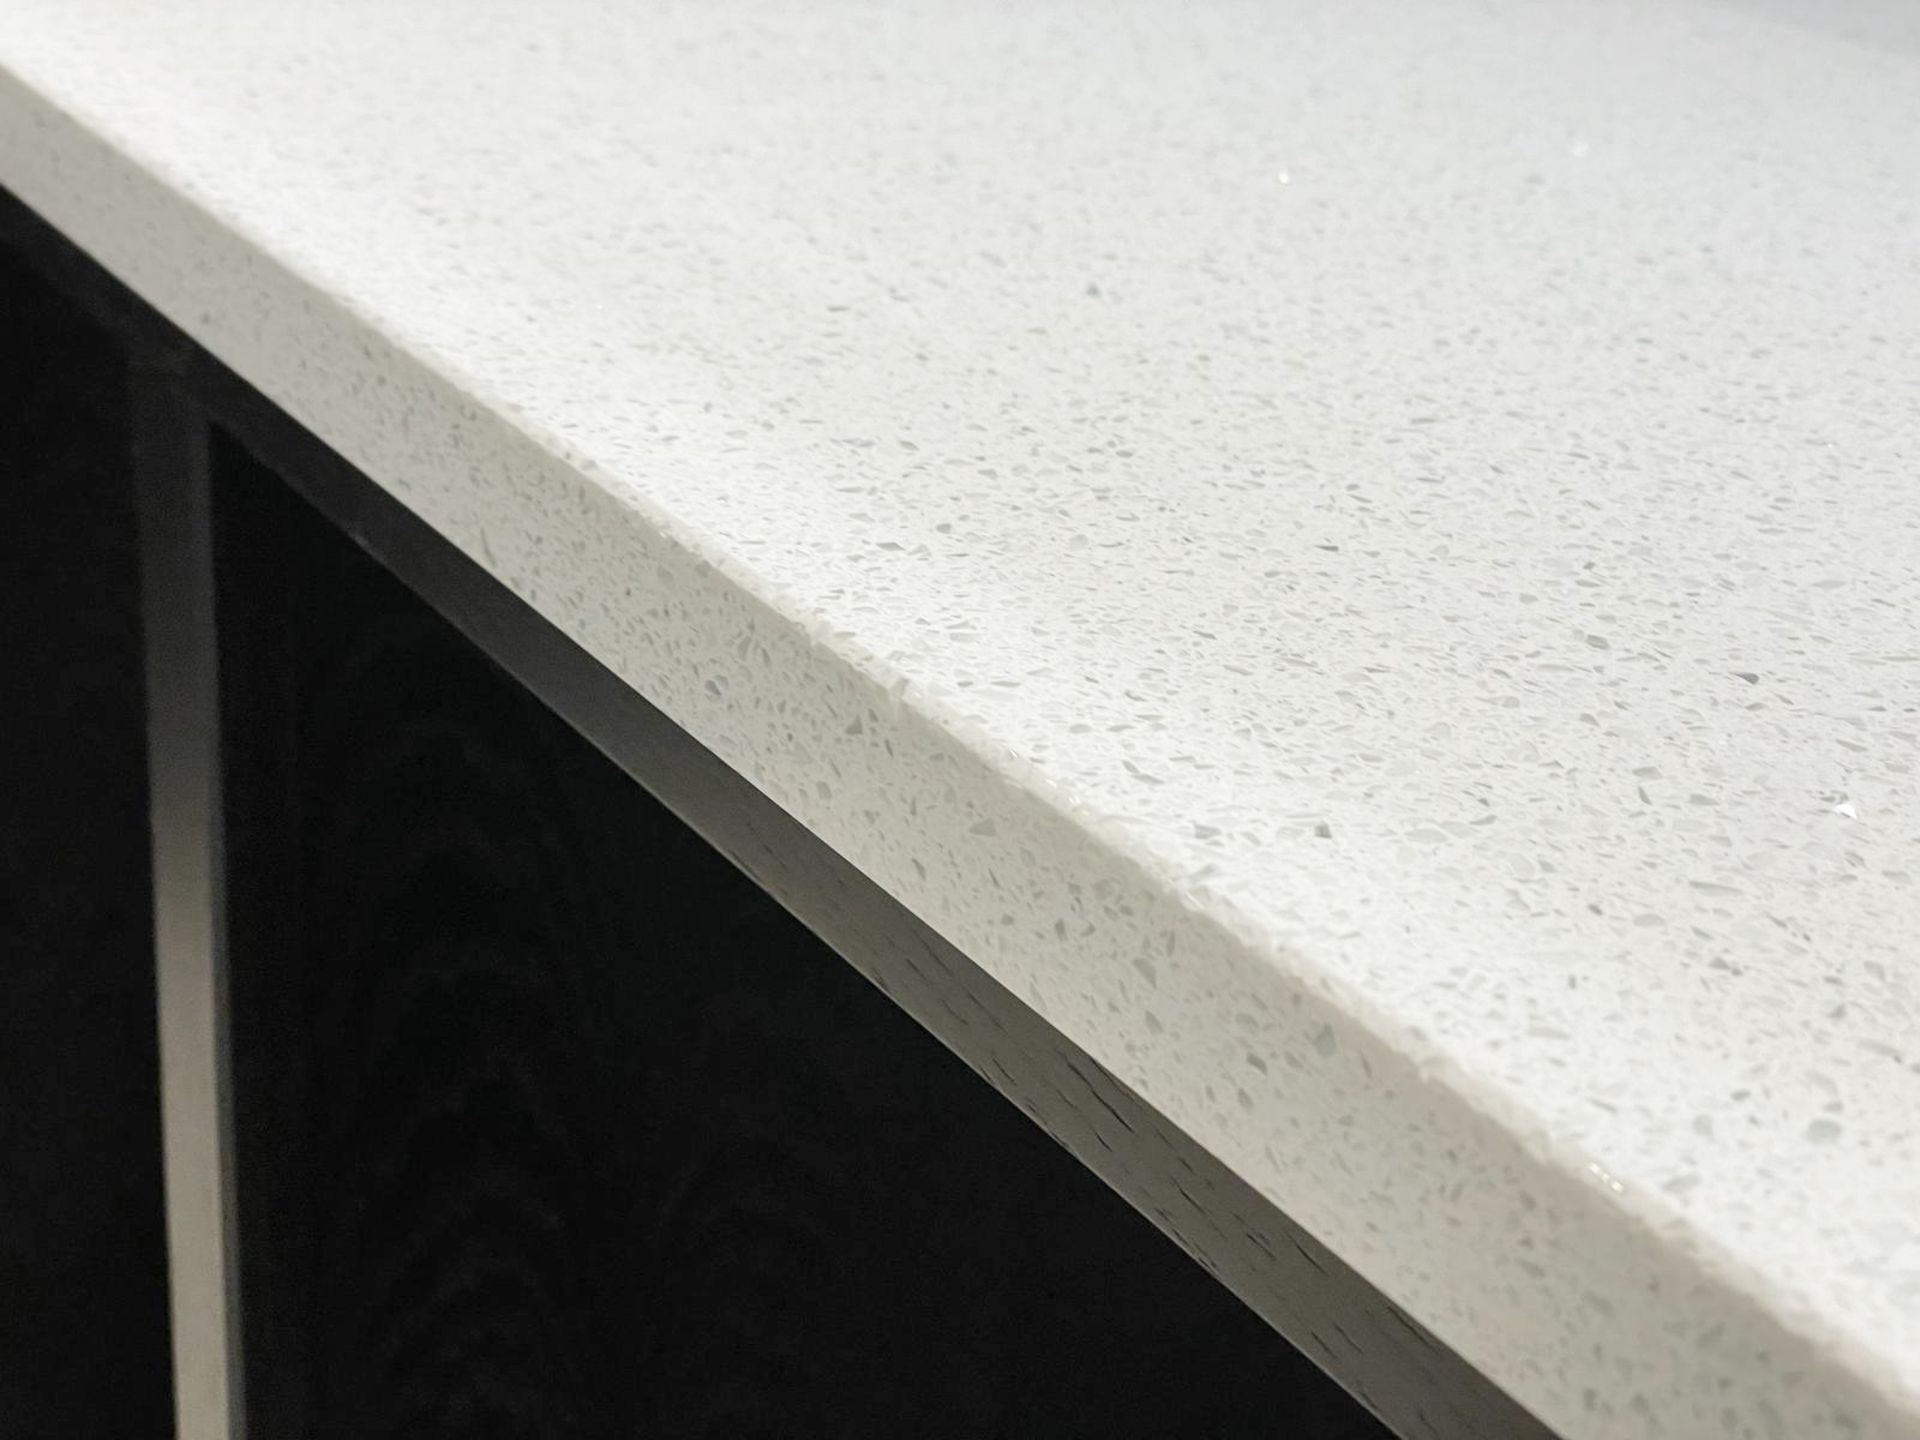 1 x Large Bespoke Fitted Luxury Home Bar with White Terrazzo Quartz Counter Worktops - Image 28 of 38